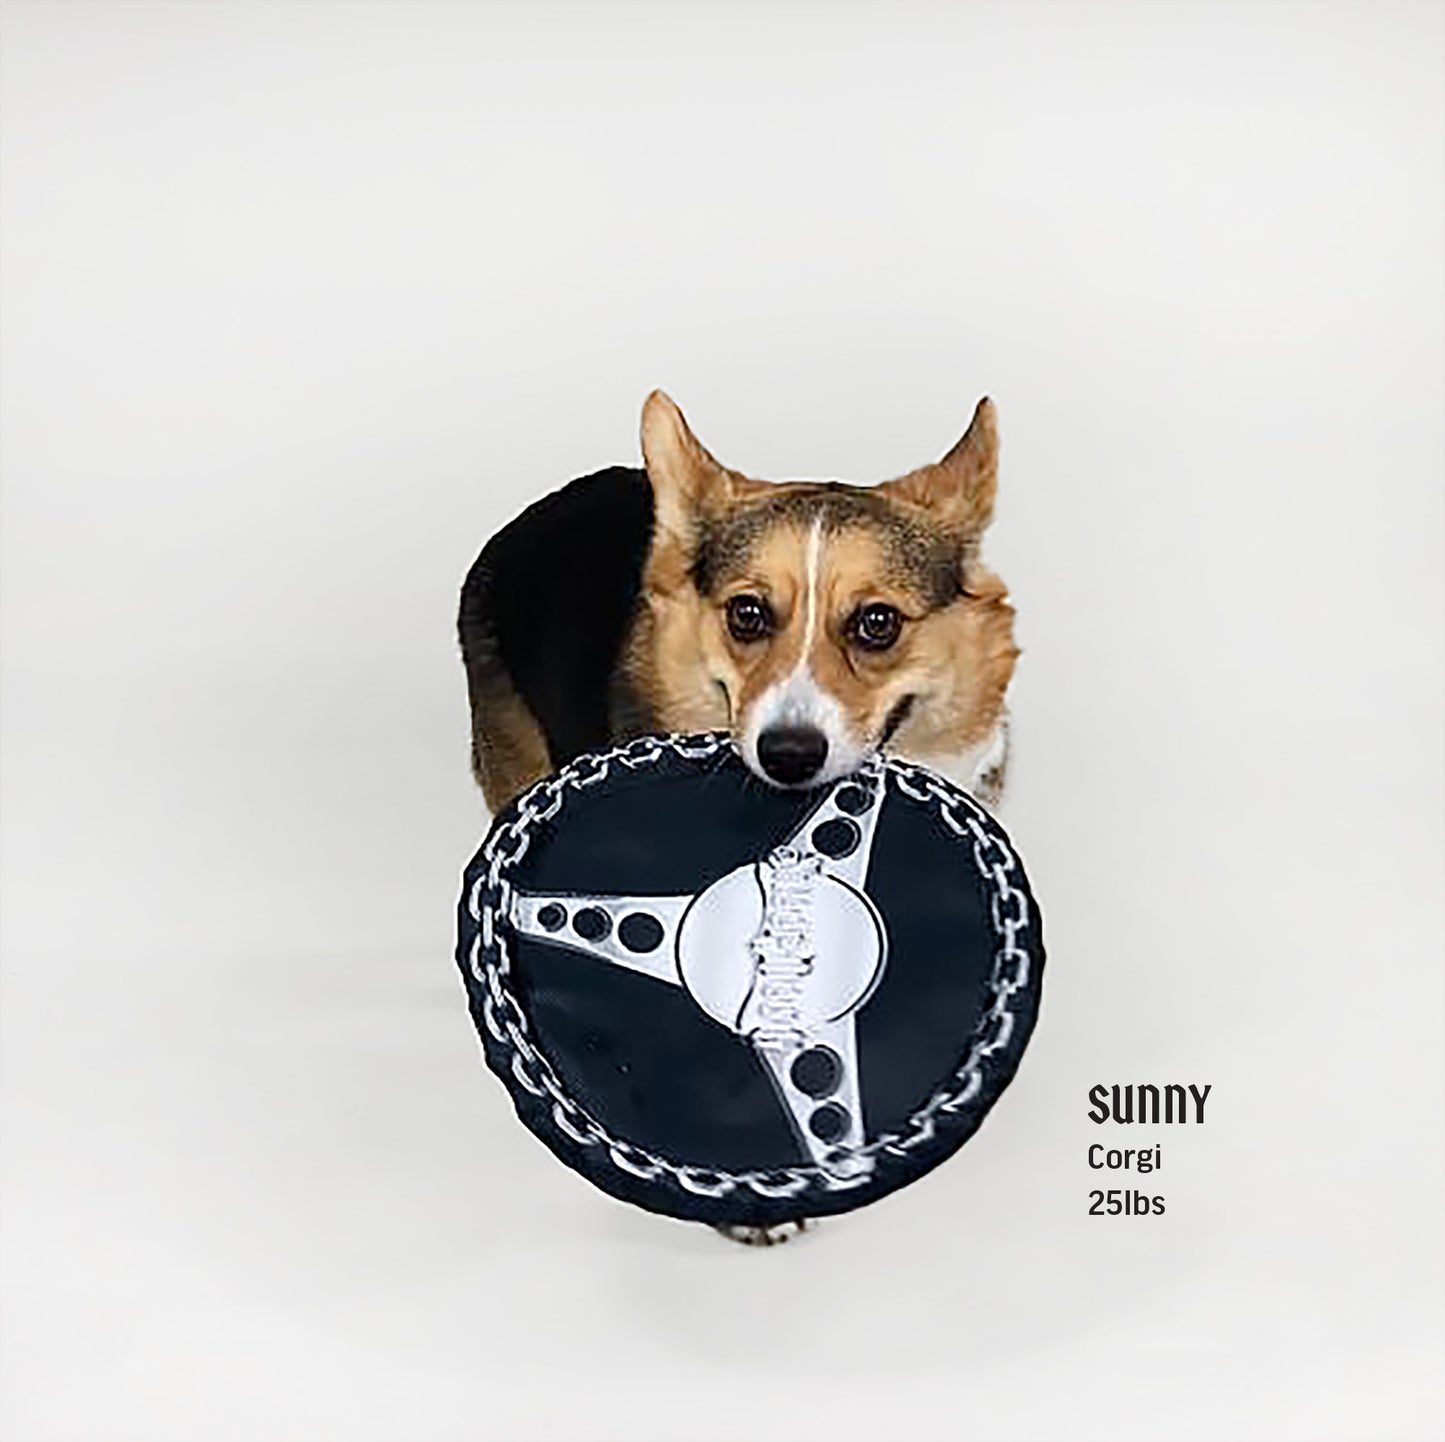 Sunny the Corgi playing with the Deluxe Chain Steering Wheel Pet Toy.